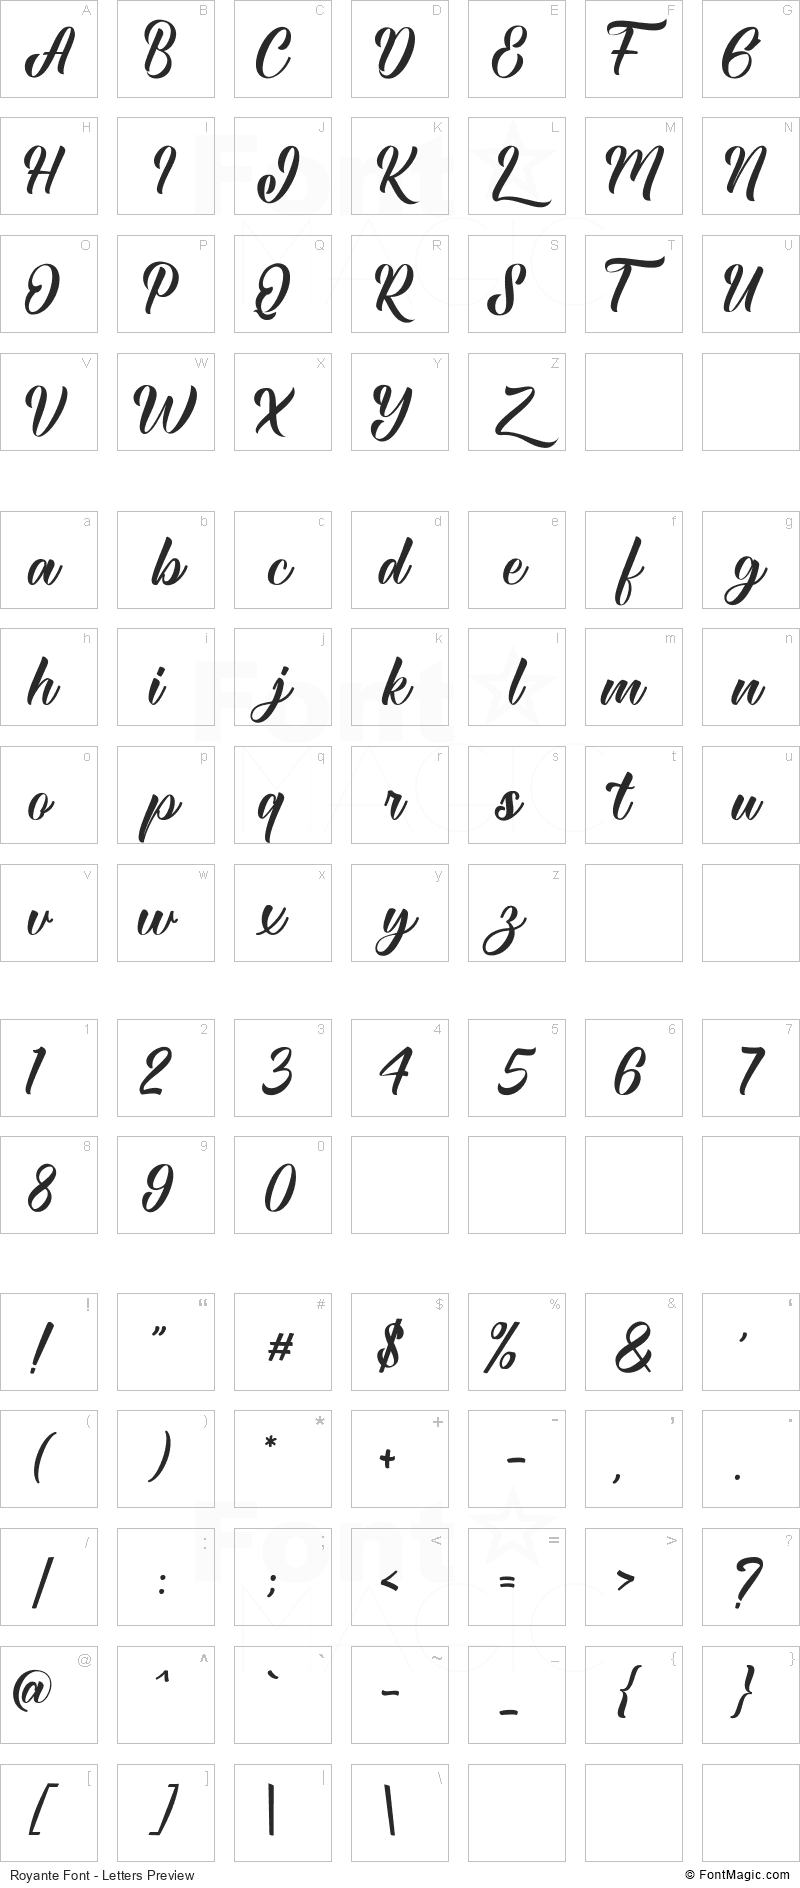 Royante Font - All Latters Preview Chart